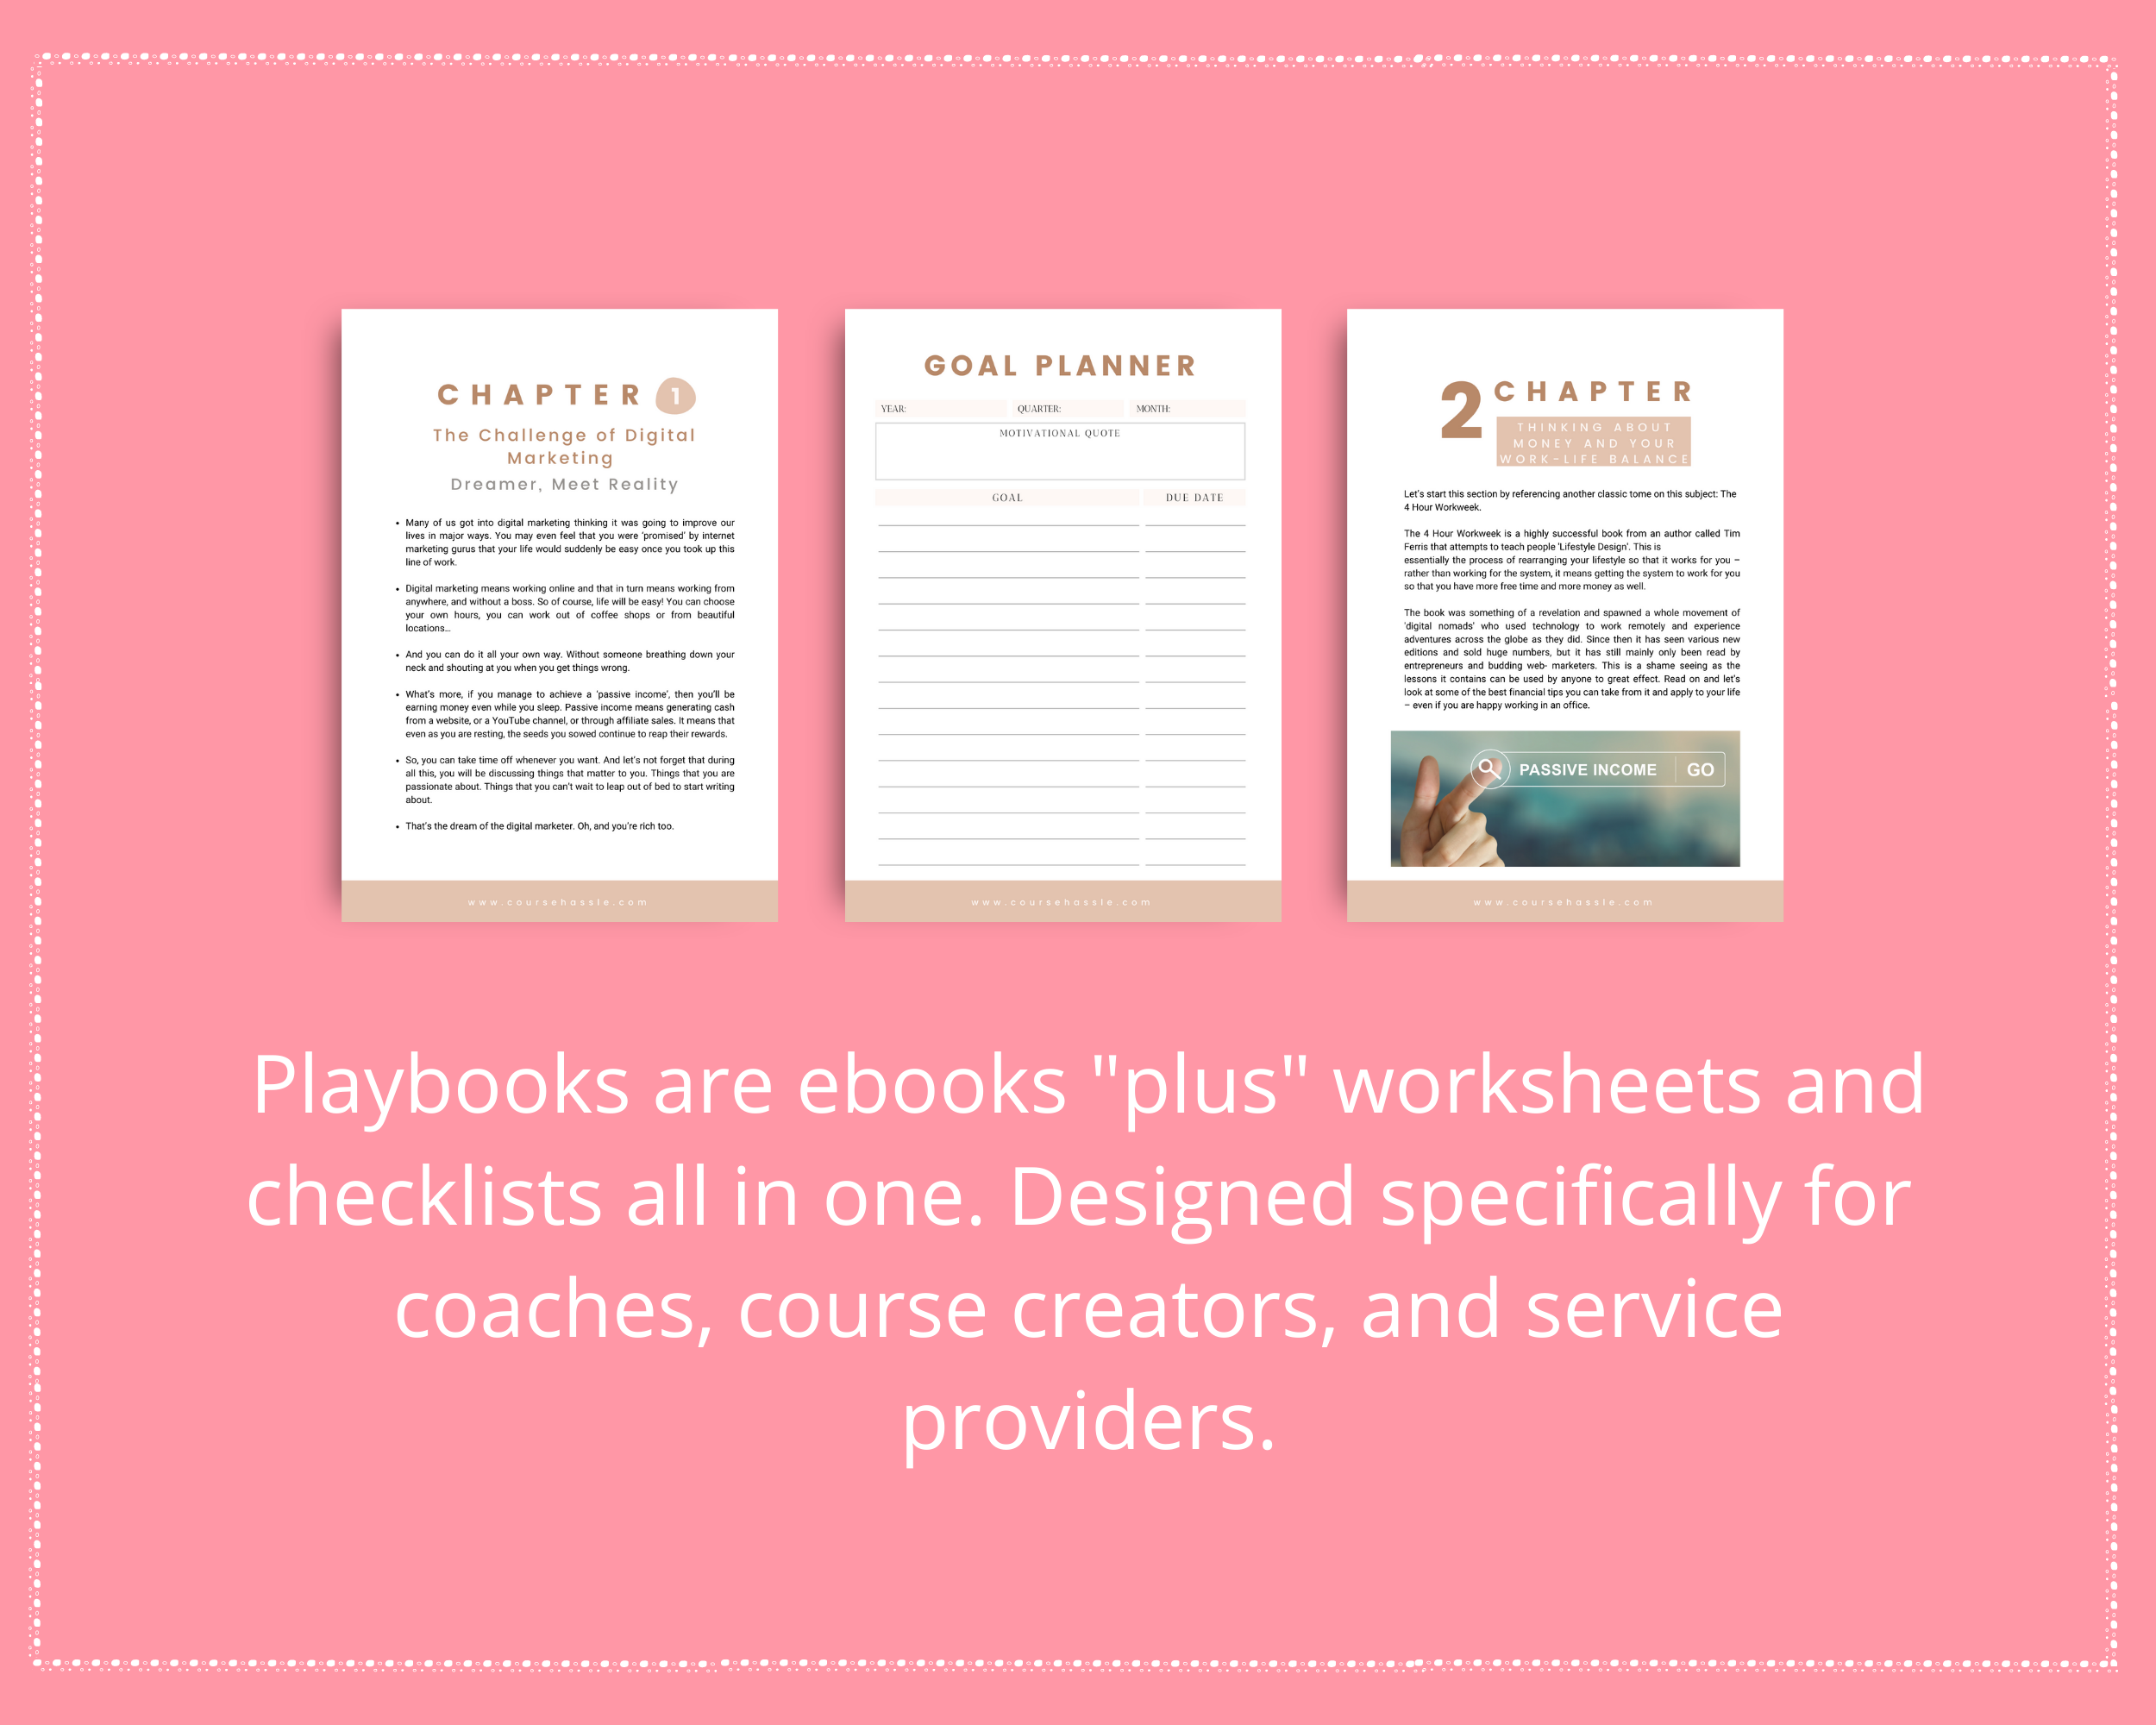 Done for You Digital Marketing Lifestyle Playbook in Canva | Editable A4 Size Canva Template